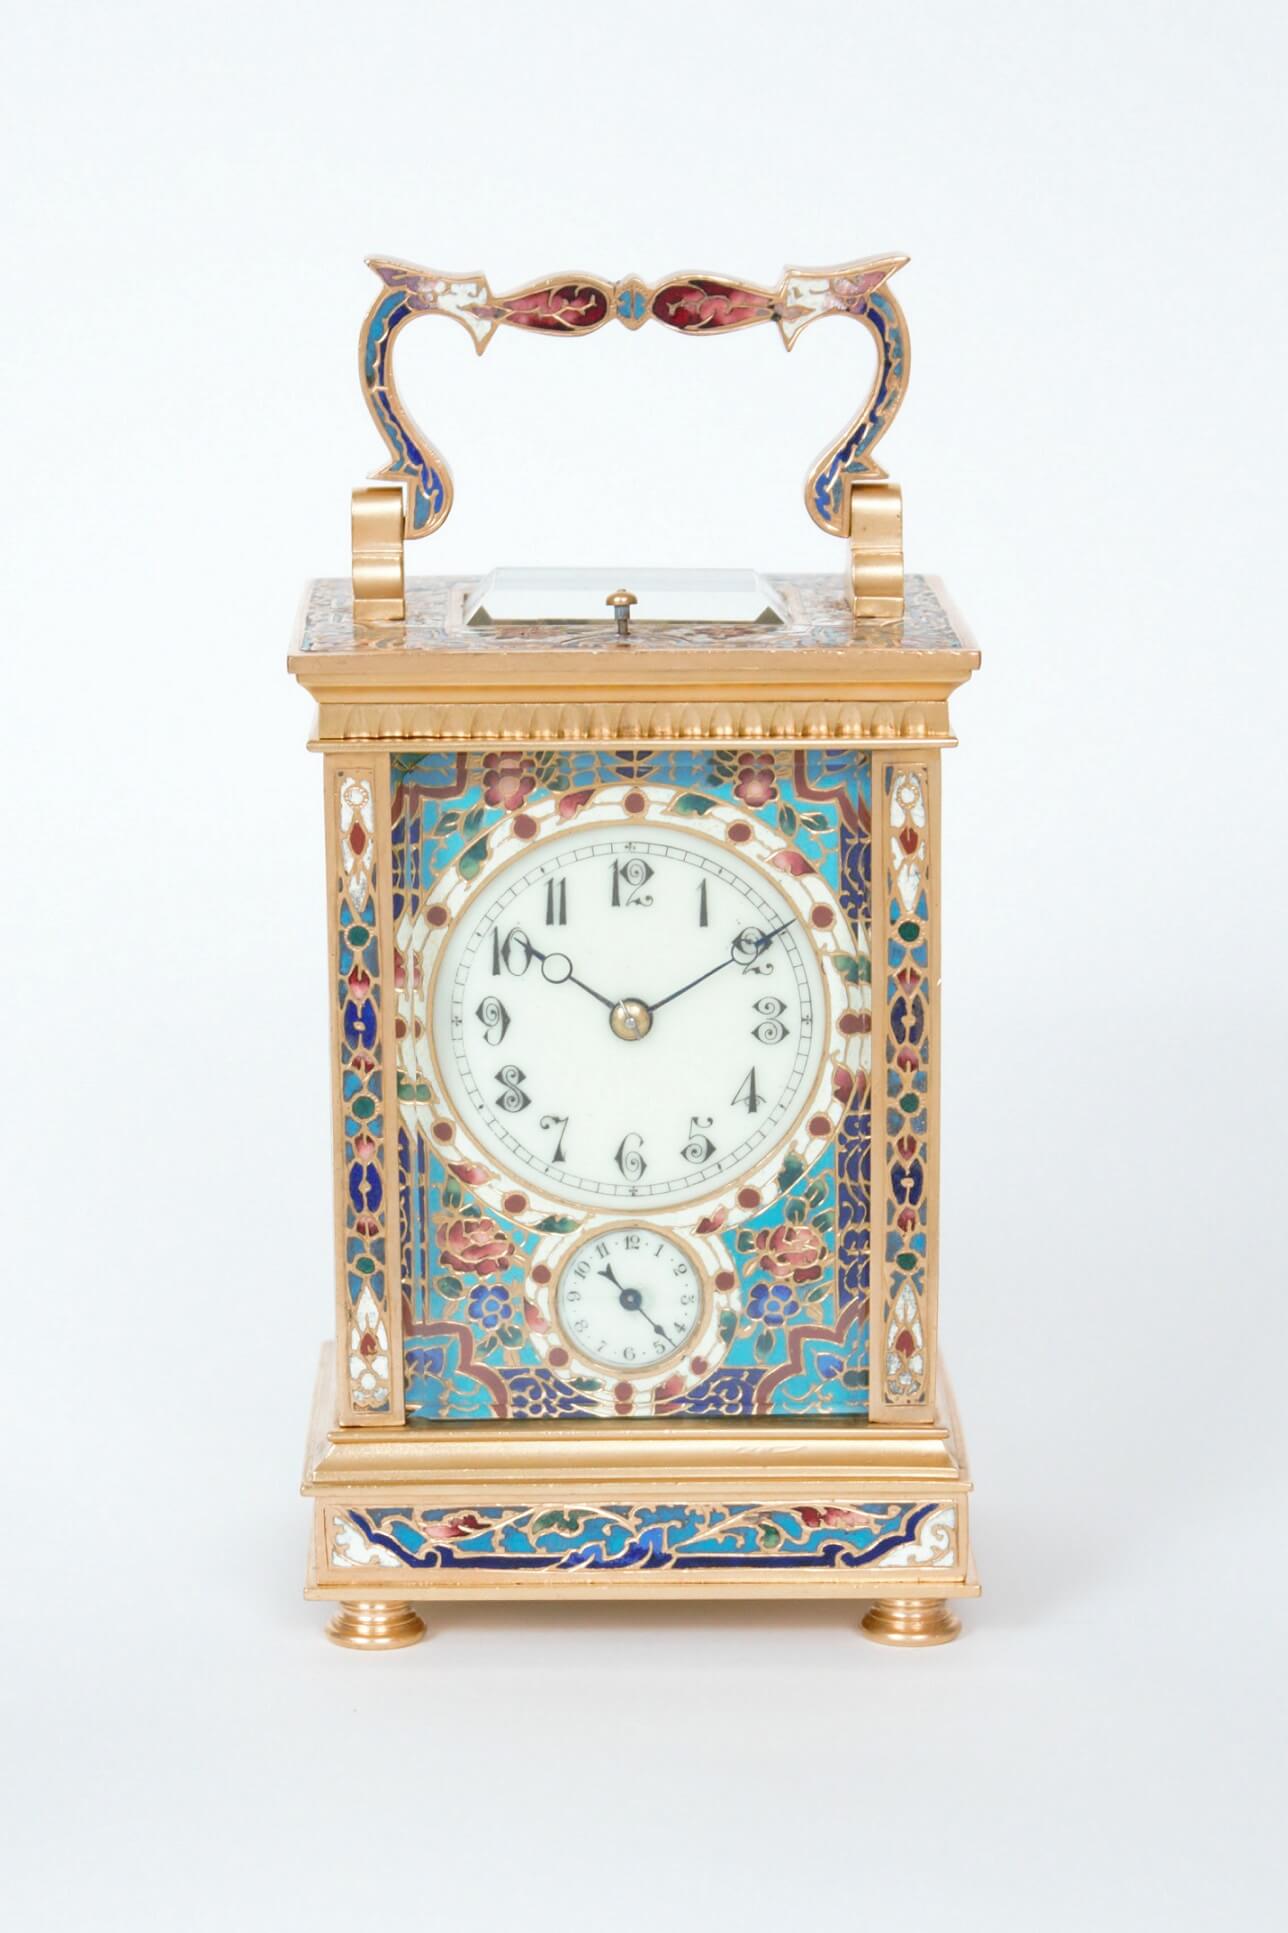 French-cloisonne-gilt-brass-antique-carriage-clock-travel-grande-sonnerie-enamel-repeating-